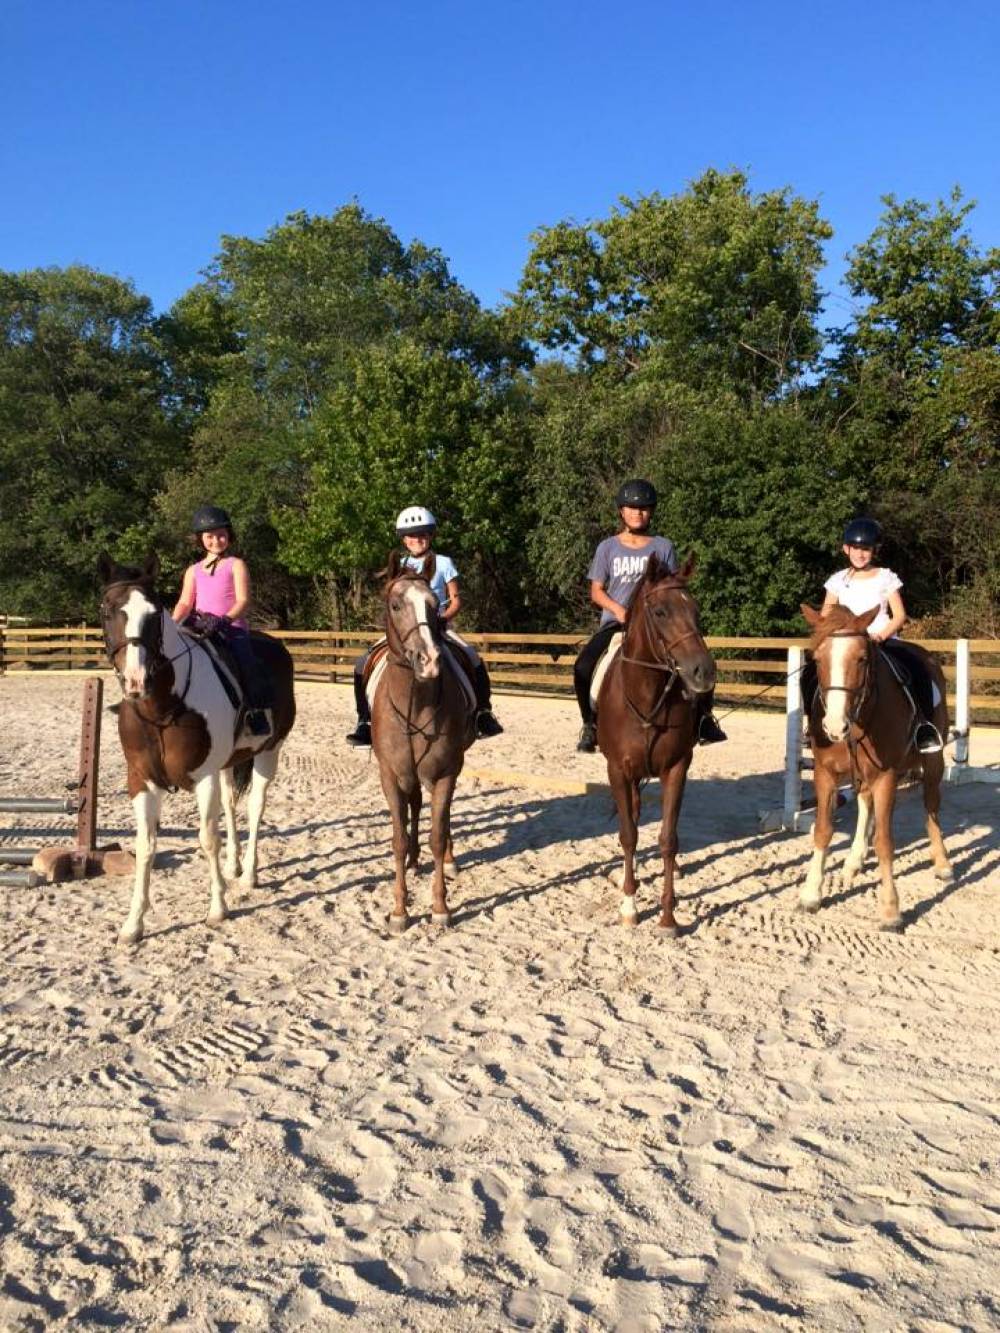 TOP ILLINOIS SUMMER CAMP: Windridge Farm Summer Horse Camp is a Top Summer Camp located in Bolingbrook Illinois offering many fun and enriching camp programs. 